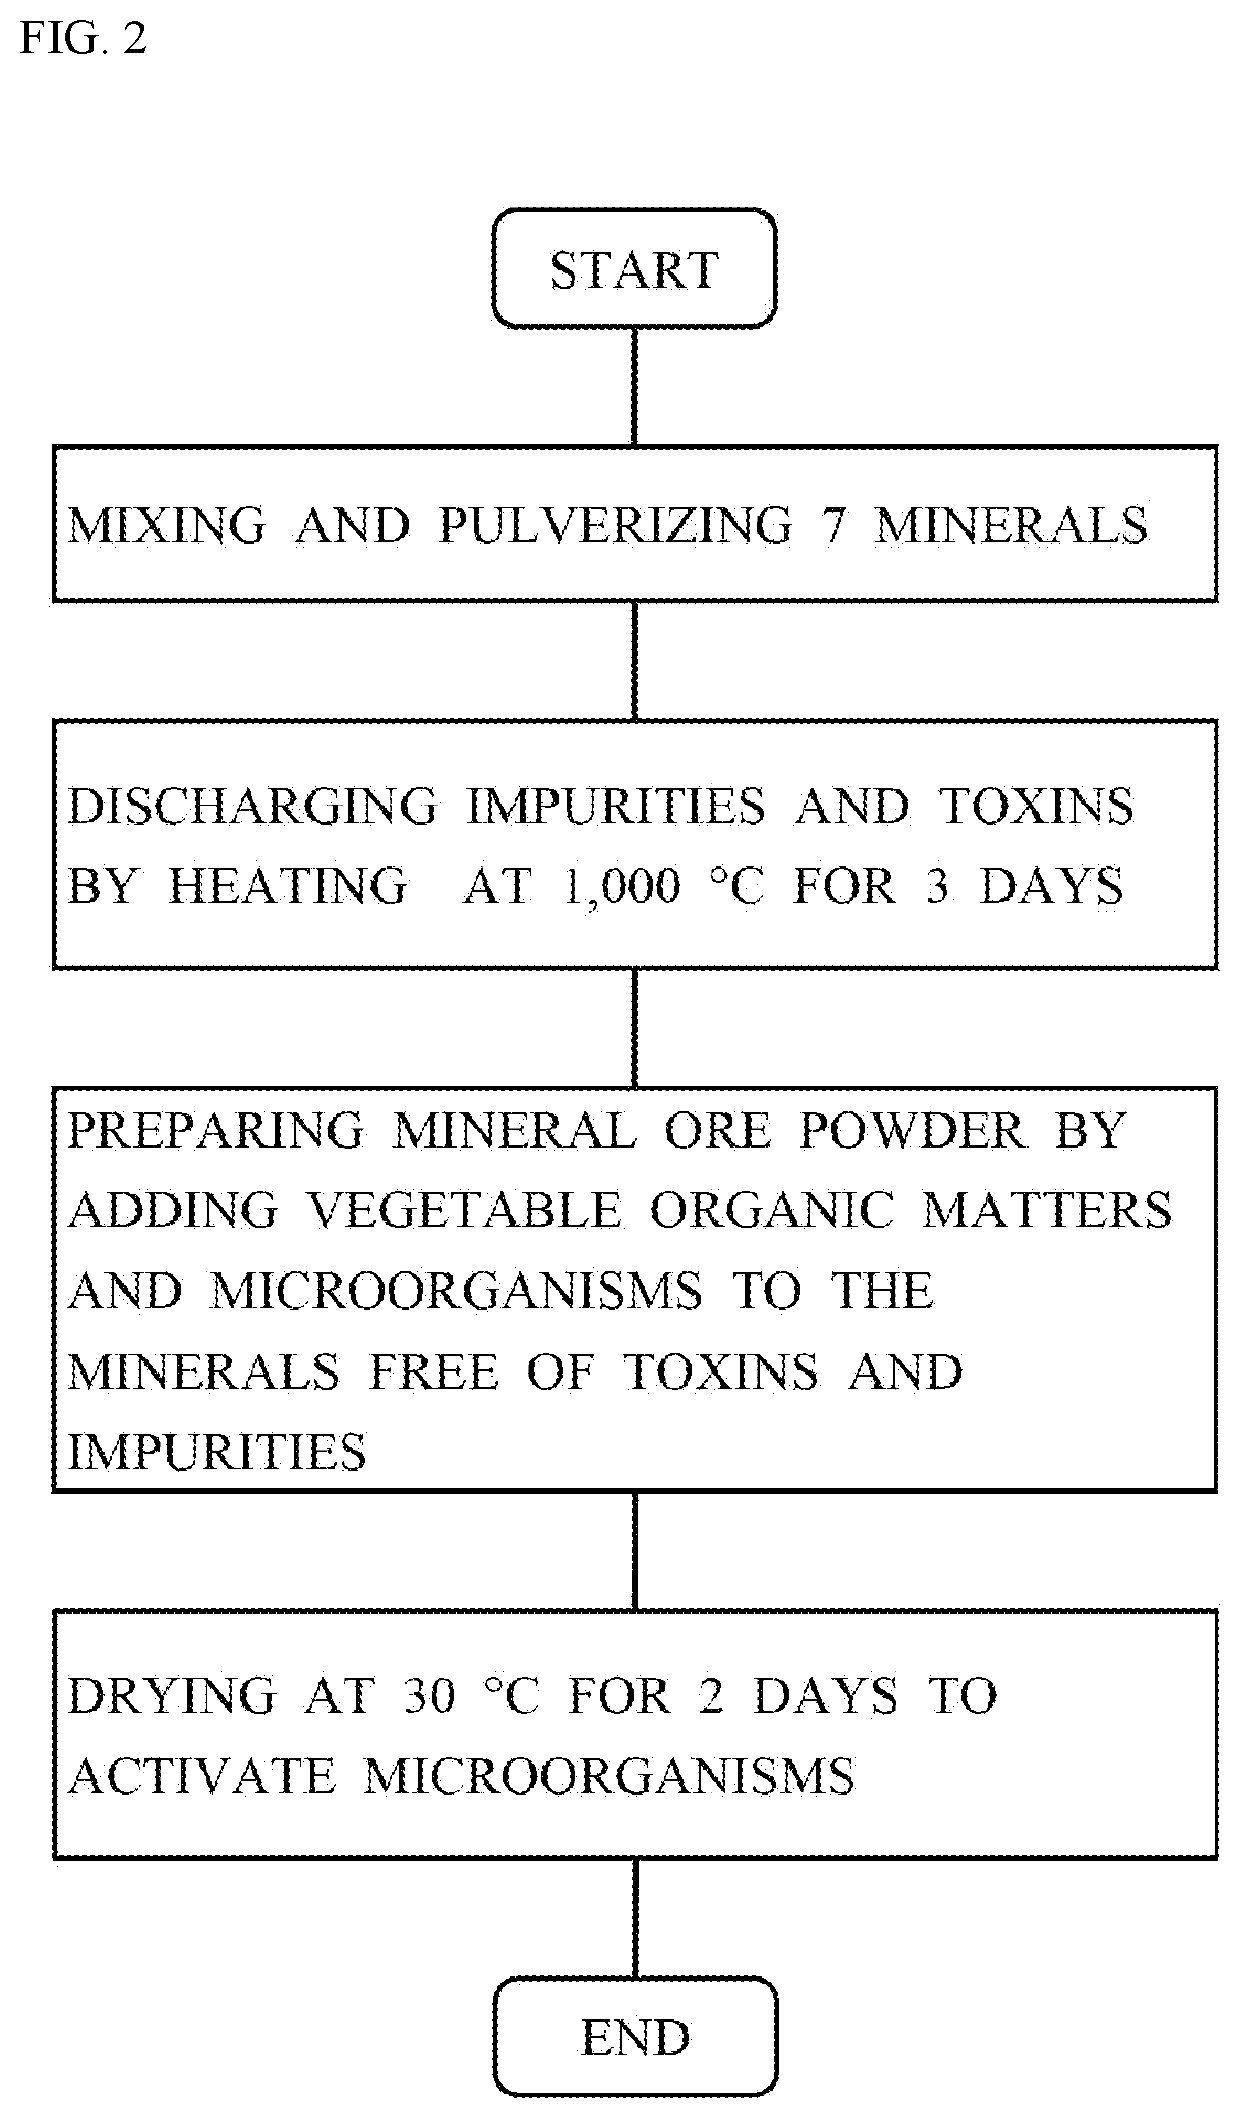 Method for preparing mineral ore powder using vegetable organic matters and microorganisms